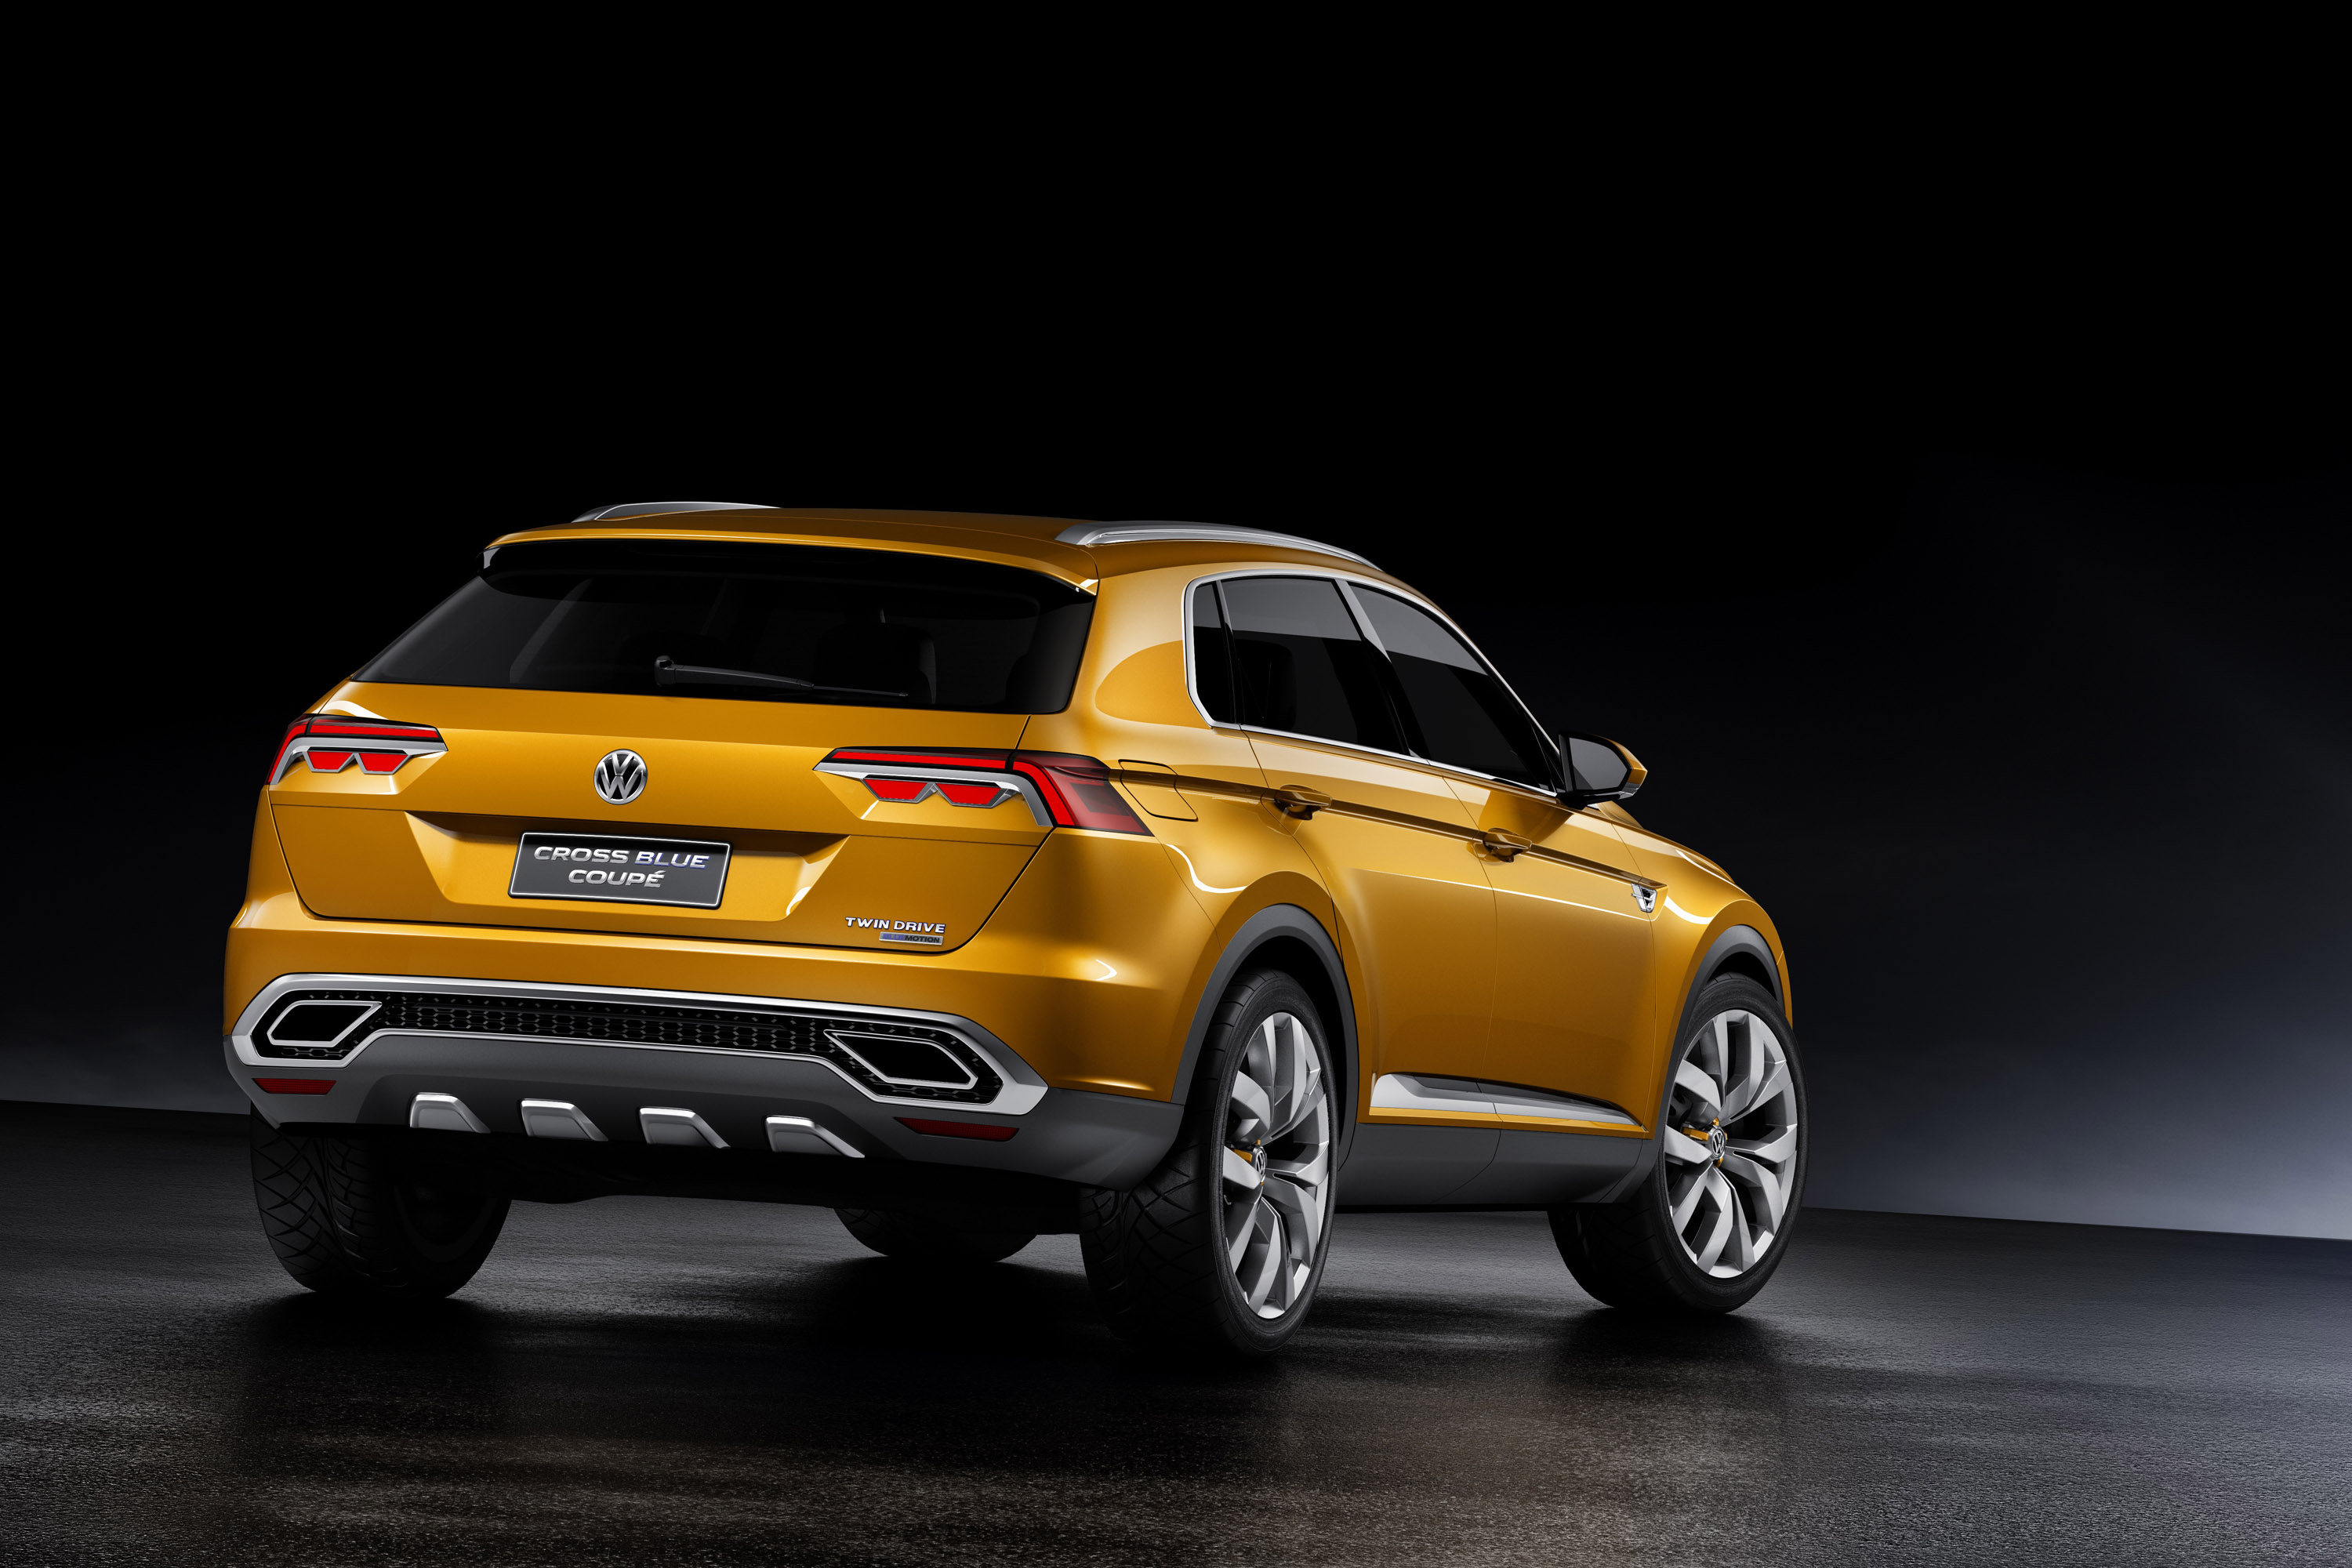 Volkswagen CrossBlue Coupe Concept